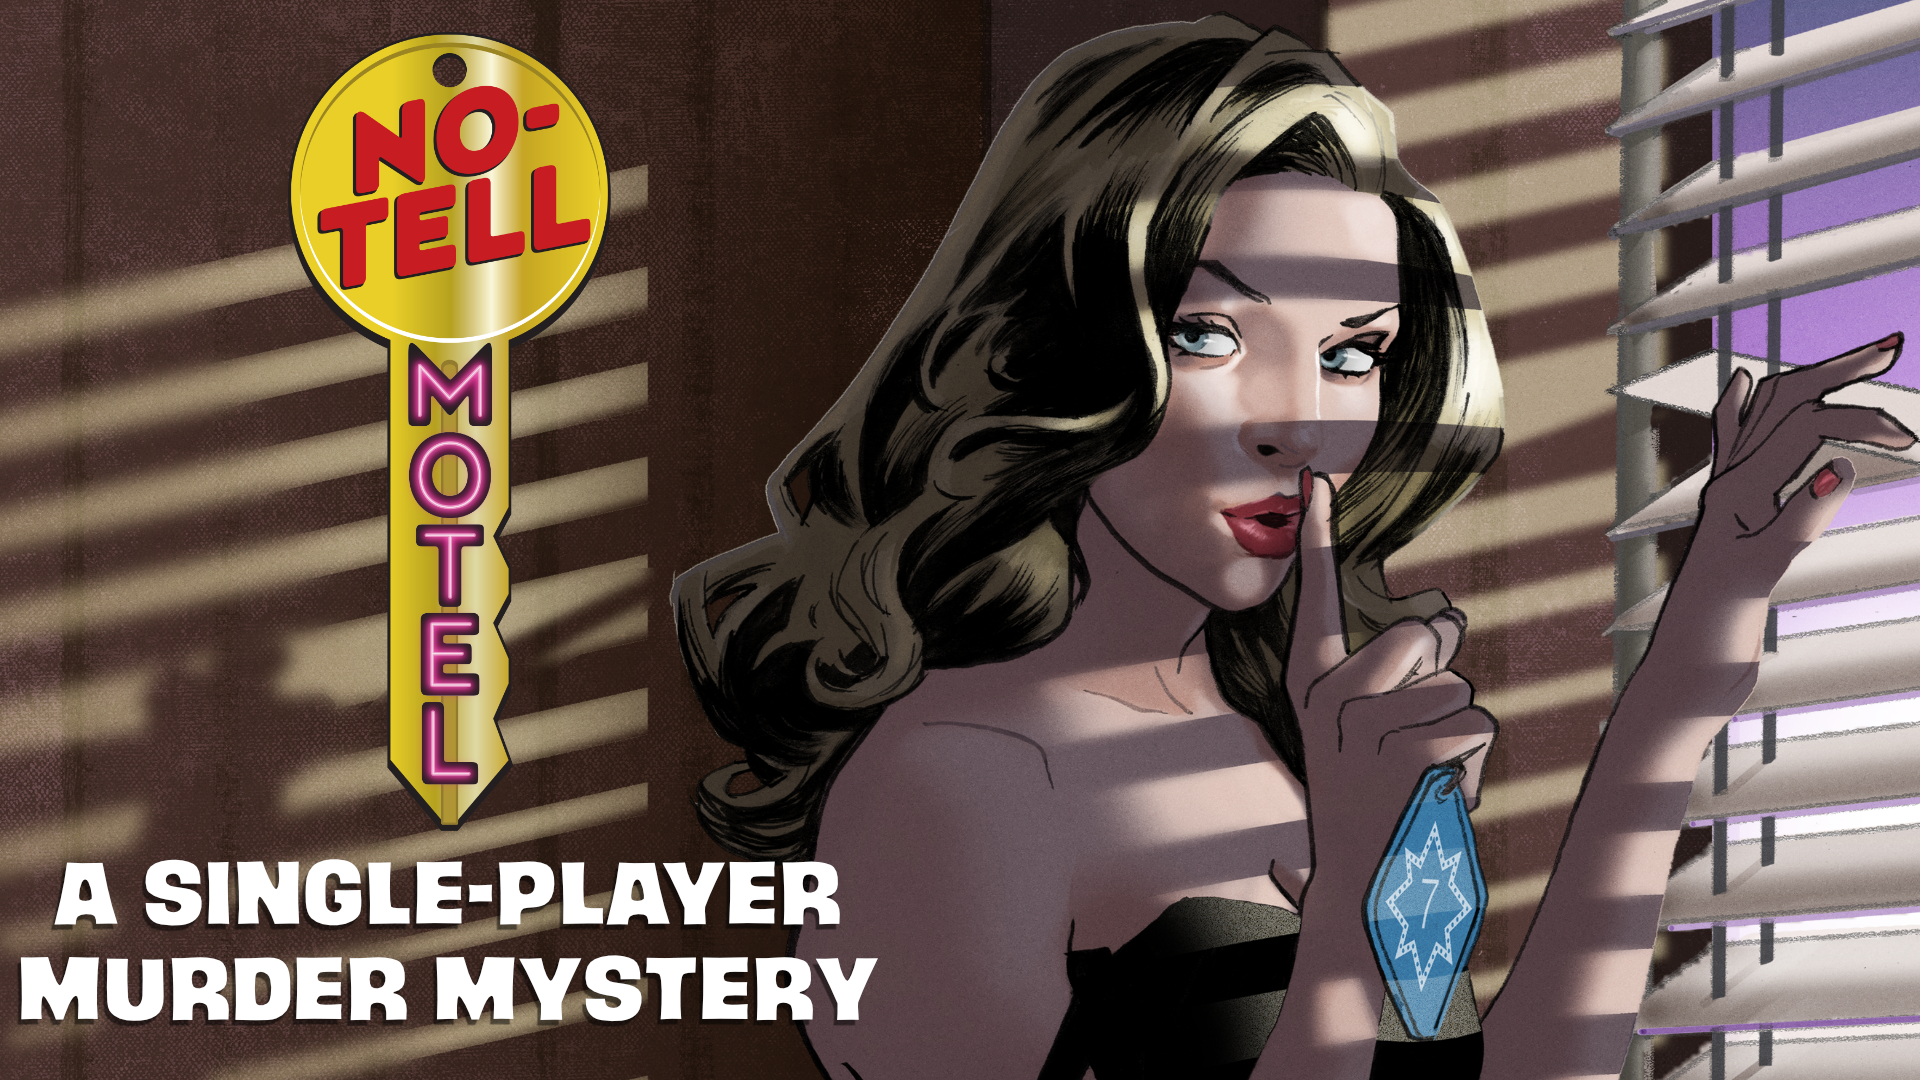 Spy and Gossip to Catch a Killer in Solo RPG No-Tell Motel